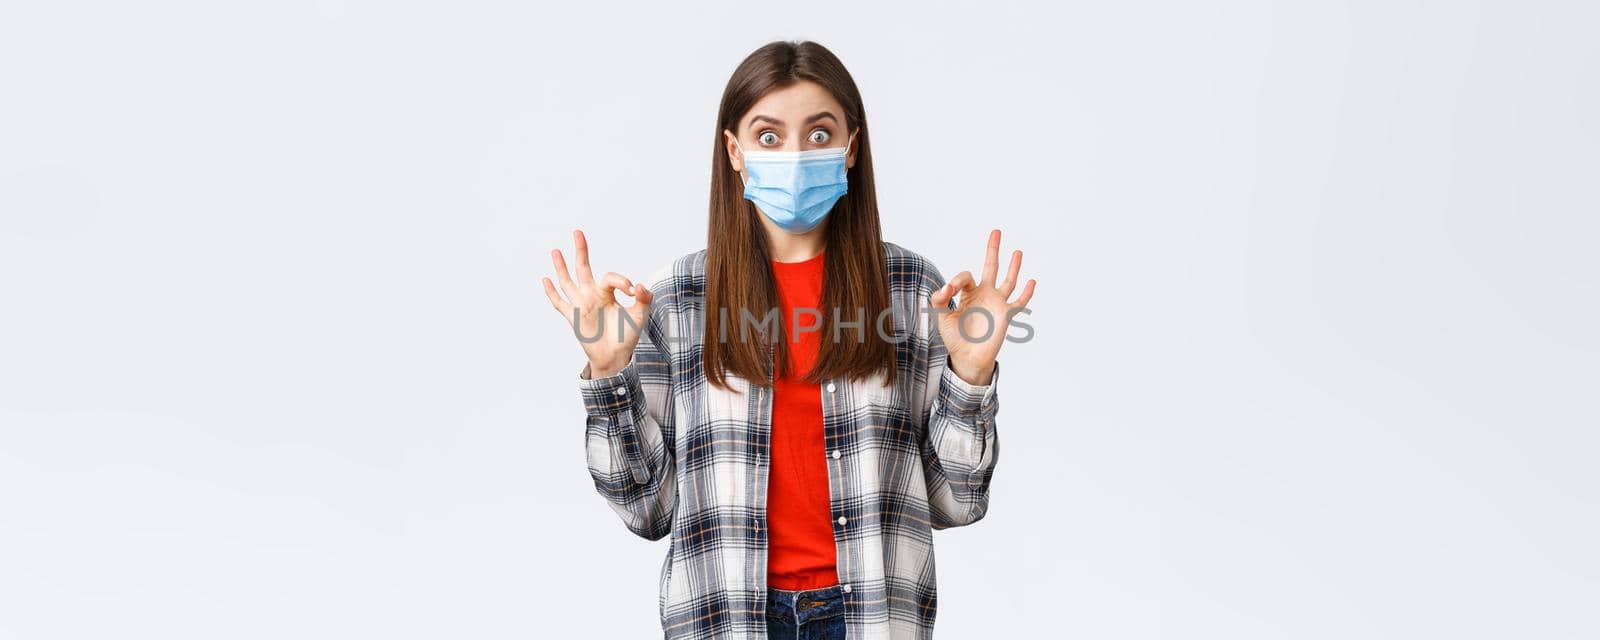 Coronavirus outbreak, leisure on quarantine, social distancing and emotions concept. Excited and surprised young woman showing okay sign as see really good promo, wear medical mask.